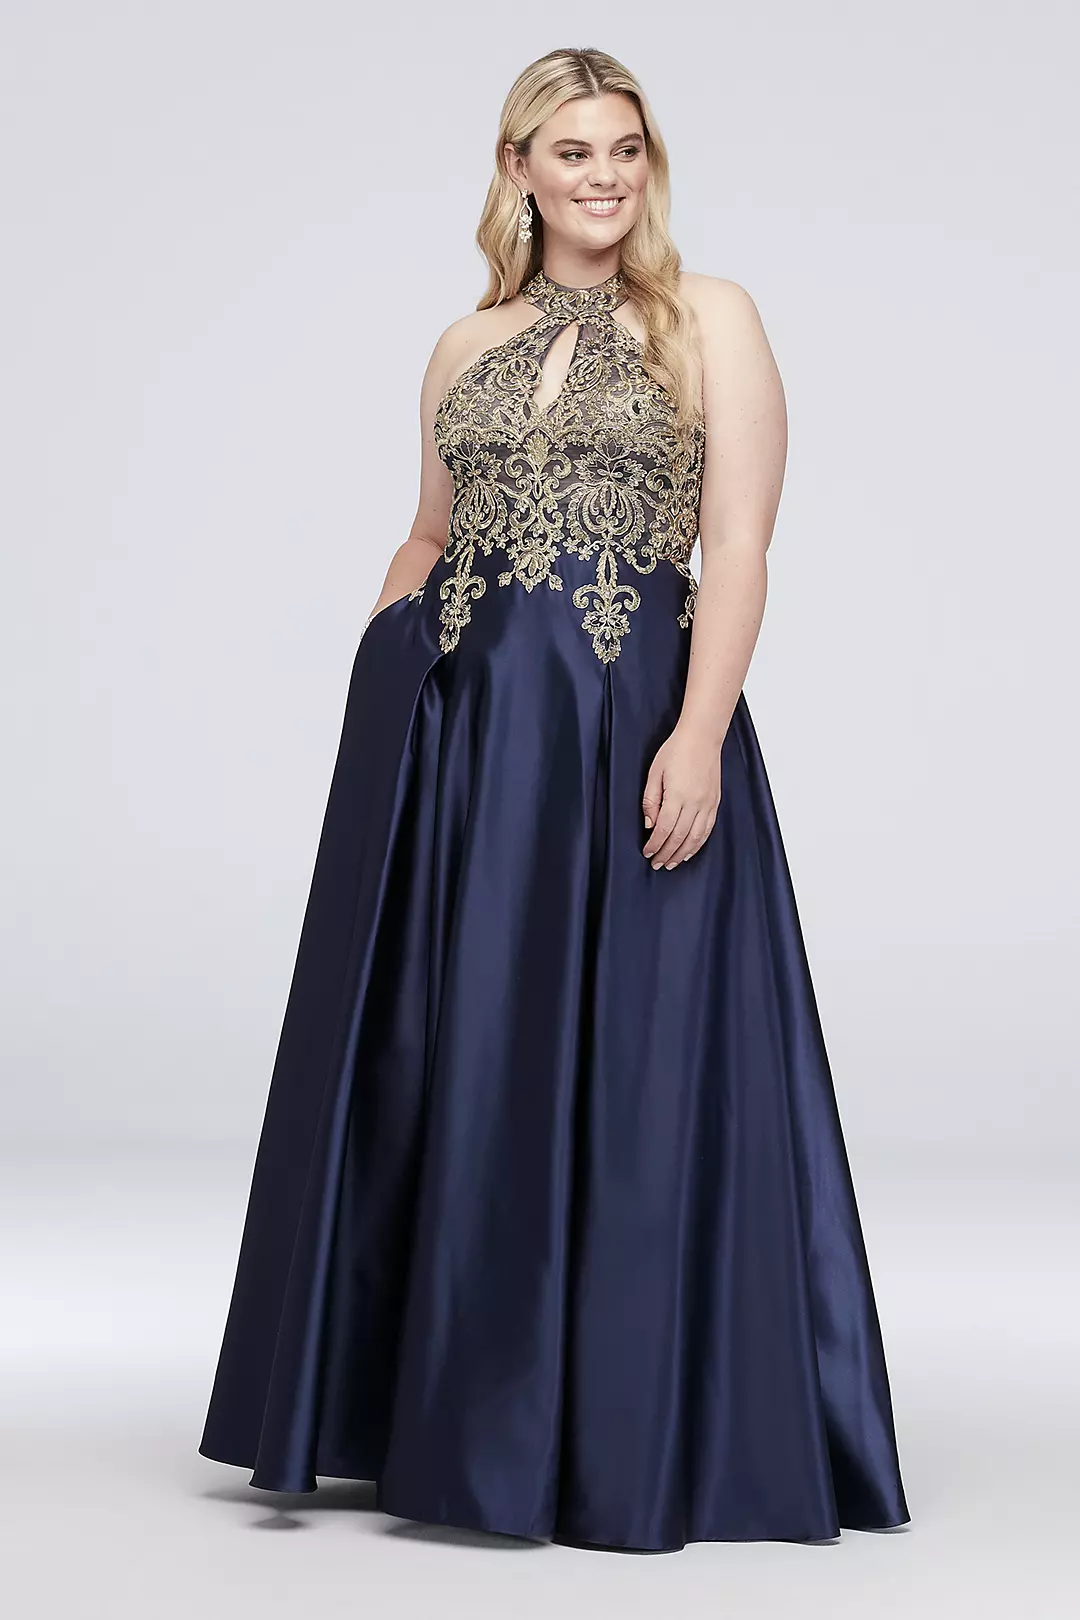 Metallic Lace and Satin Round Neck Ball Gown Image